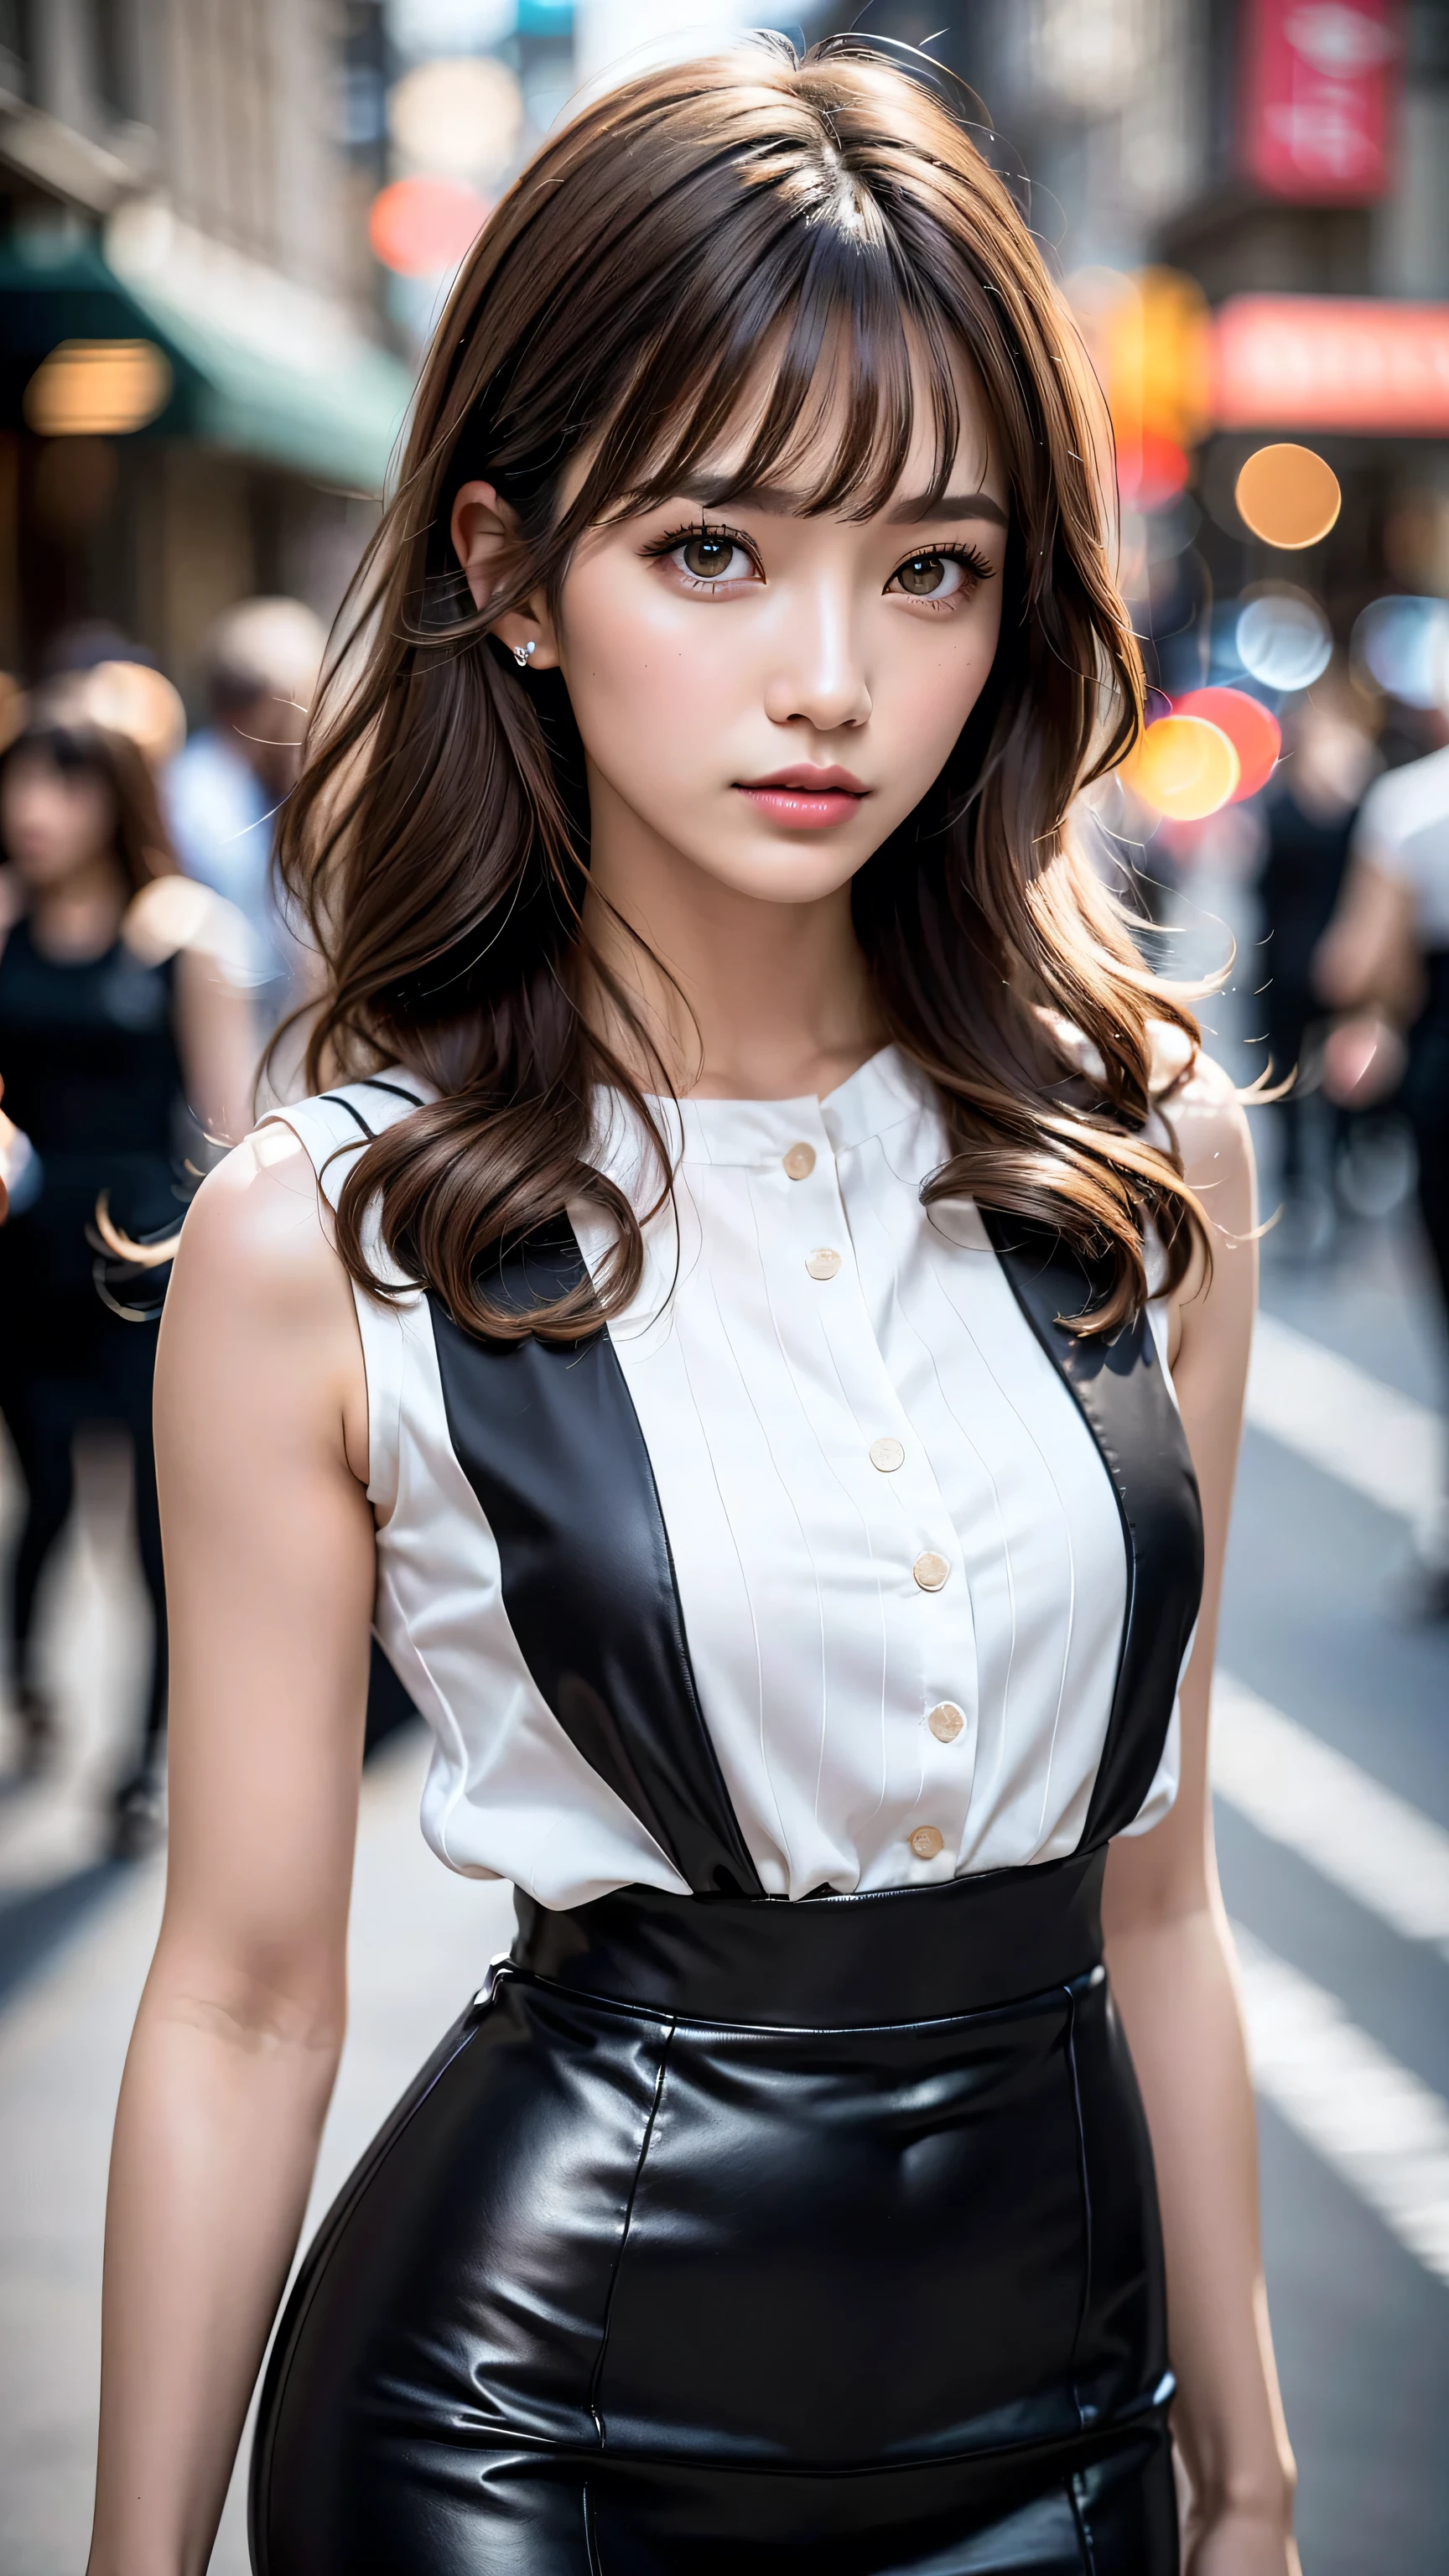 Generated in SFW, (1lady:1.37), Supermodel, 21 years old, Office Lady, Japanese, Cowboy Shot, look at the audience, Shut your mouth, Sulky face, (high detailed portrait),(high quality:1.3)(Hyper-realistic),(photorealistic),((sharp focus)),(highest resolution),((the most absurd quality)),(masterpiece), Official art, (Improvement of quality:1.4), (Very beautiful facial details), (Highest quality realistic skin texture:1.4), (Perfect Anatomy:1.37), Accurately depicted５Finger, In the hustle and bustle, (Black sleeveless blouse:1.3), (Pencil Skirt:1.1), very slim figure, Tight waist, very small head, Very small face, Very detailed, Symmetrical eyes, Thin lashes, Sharpen your eyebrows, Natural Makeup, [Pink lipstick], ((A great eye for quality:1.2)), (tired, Sleepy and satisfied:0.0), (Beautiful Lips:1.33), (Great nose:1.2), (Flat Chest), (Slim lower body), Shiny brown hair, Let your bangs hang long, (Wavy Hair:1.21), Side lighting, 